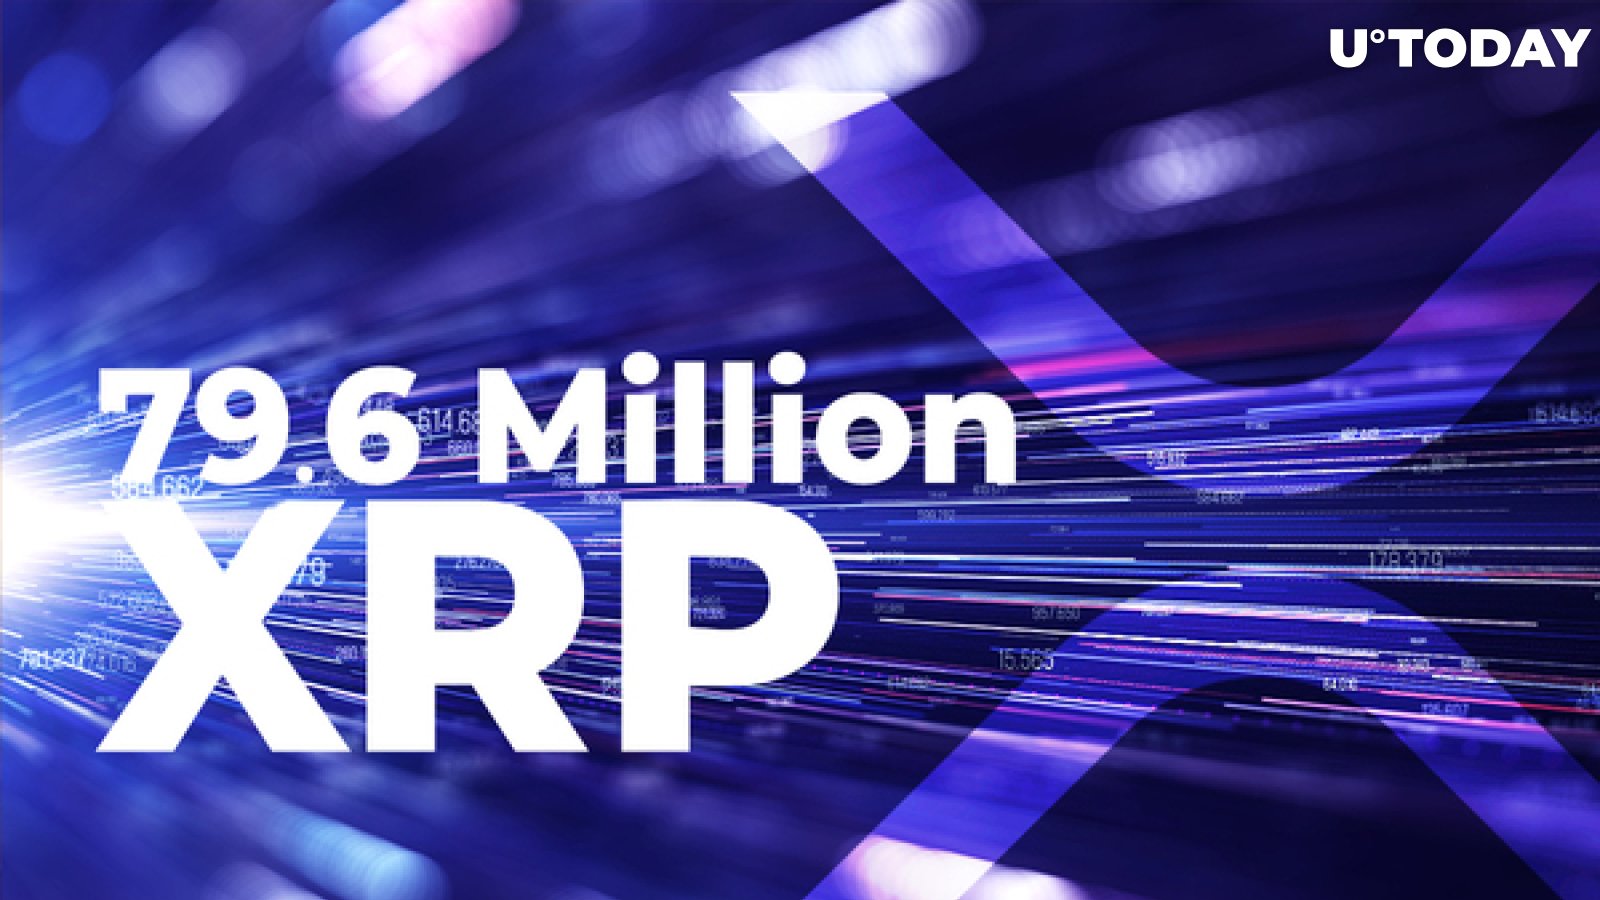 79.6 Million XRP Moved by Ripple Giant and Bitstamp After XRP Hit $1.76